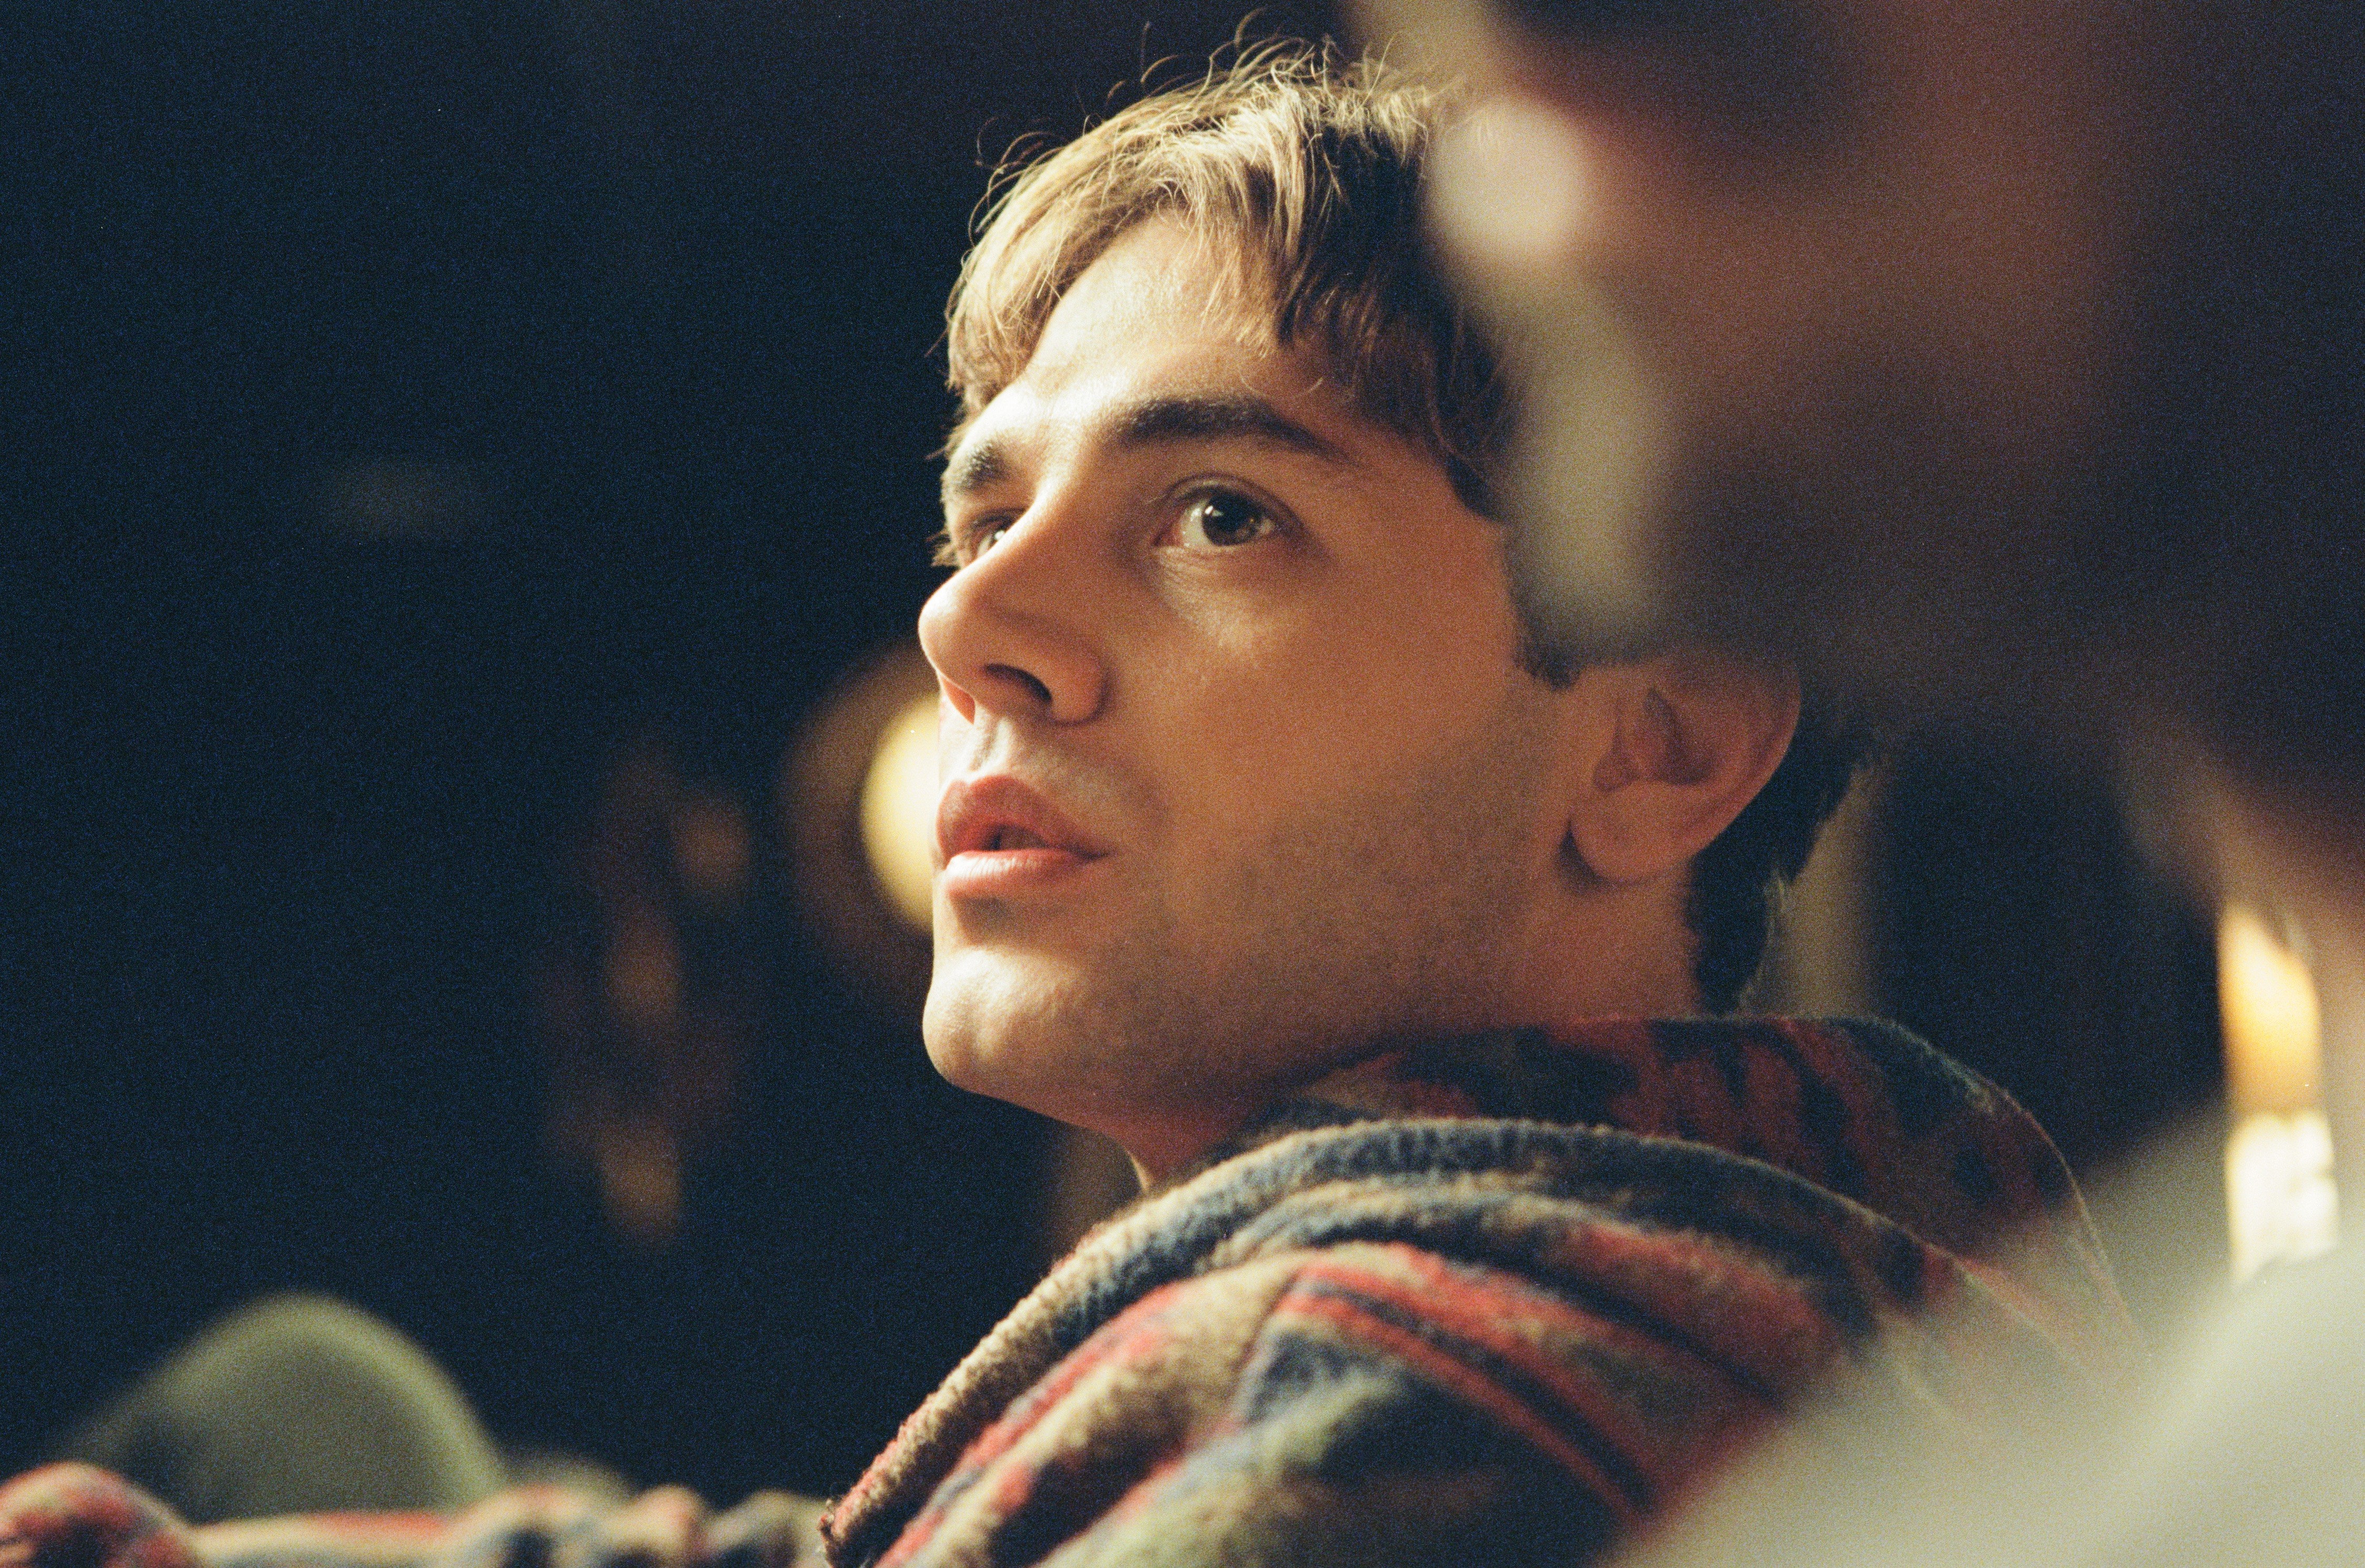 Xavier Dolan on directing his idols and making tough choices in